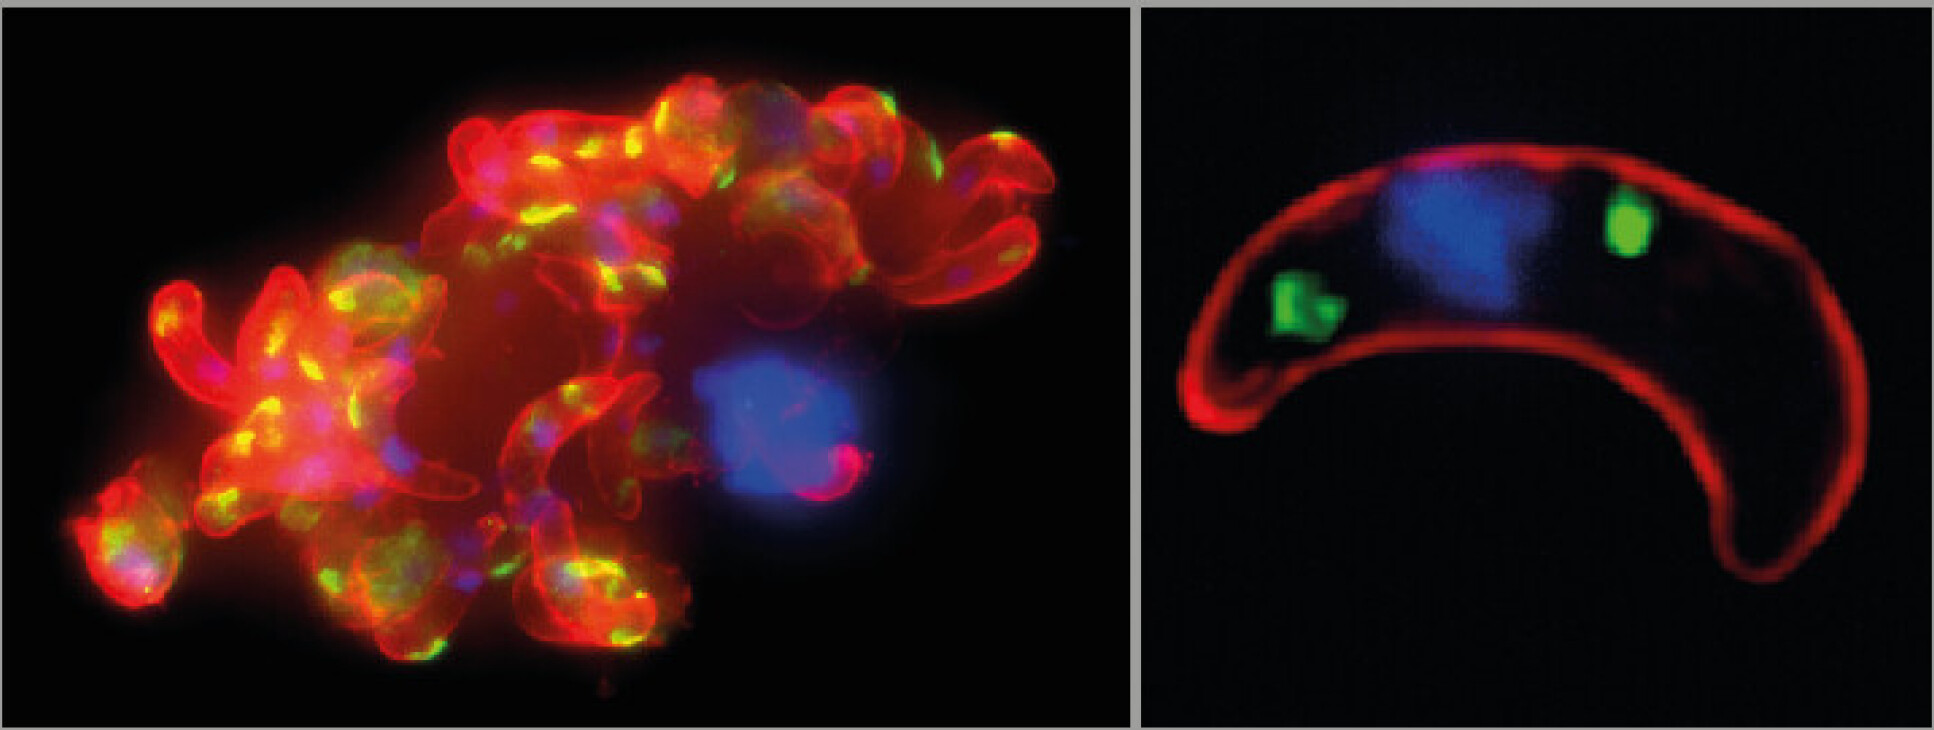 Two colourised images of malaria parasite cells